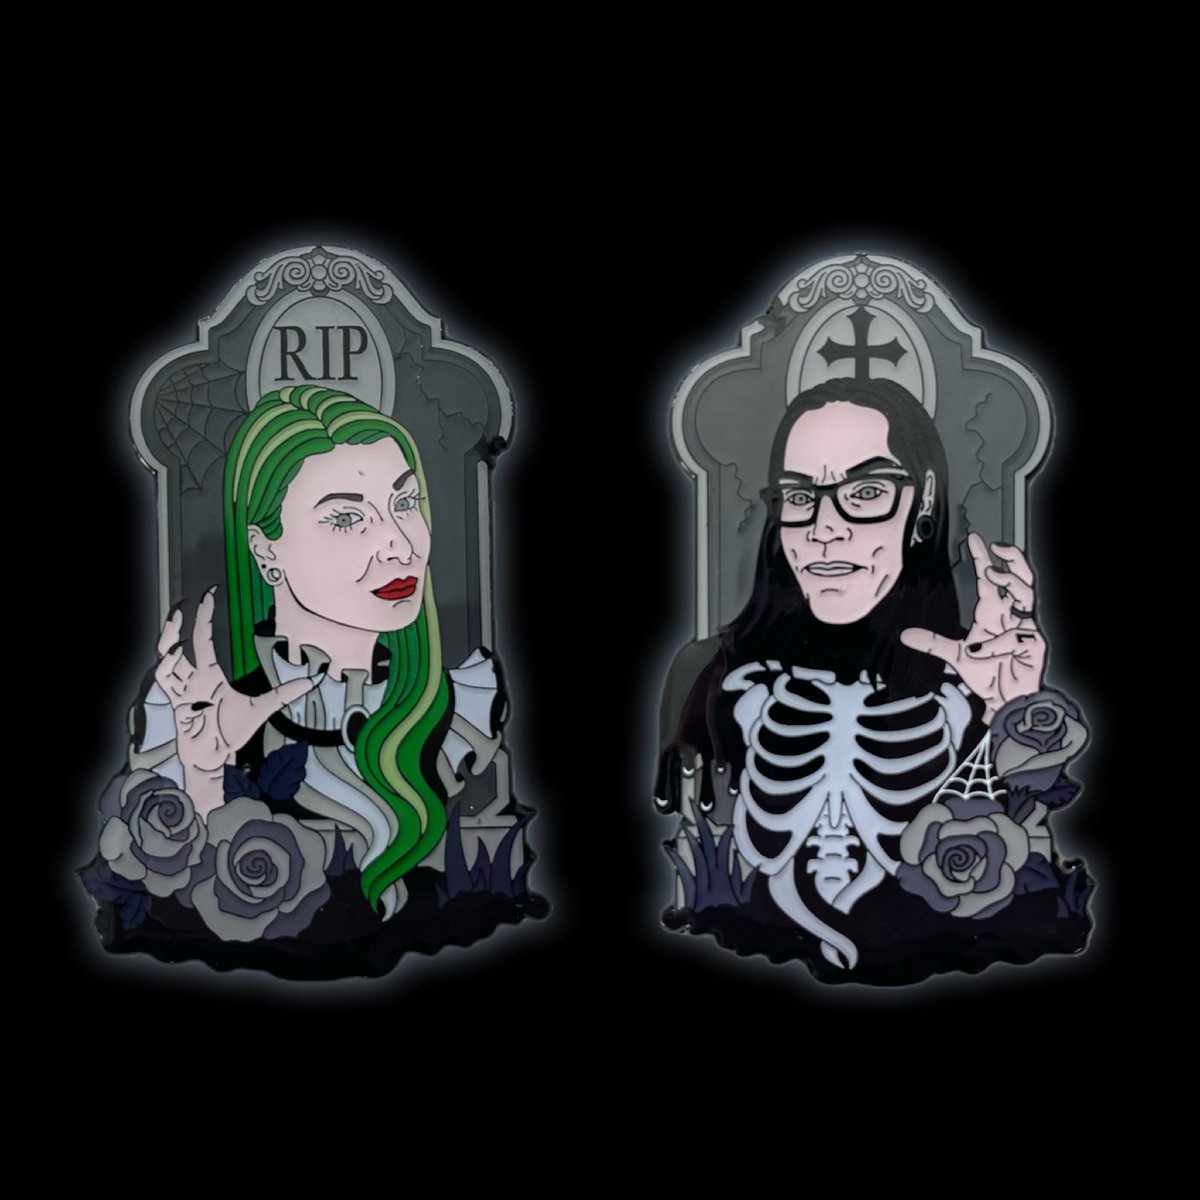 NEW Tombstone Enamel Pin Set coming in July. These are a limited edition collaboration we did with our friends at Demonic Pinfestation.